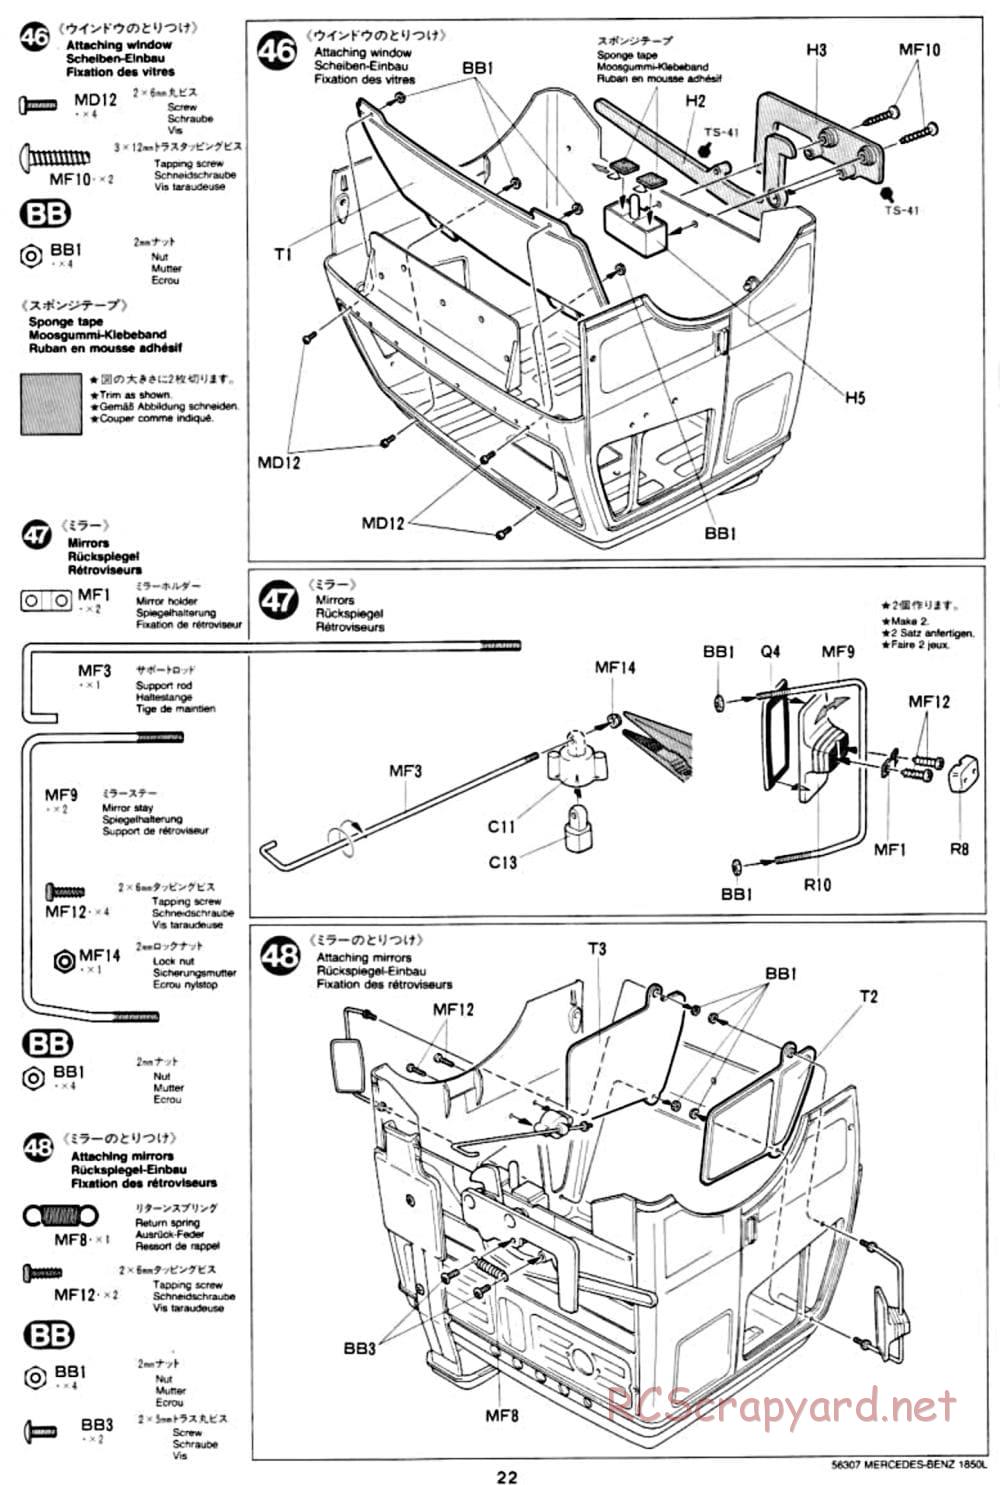 Tamiya - Mercedes-Benz 1850L Delivery Truck - Manual - Page 22